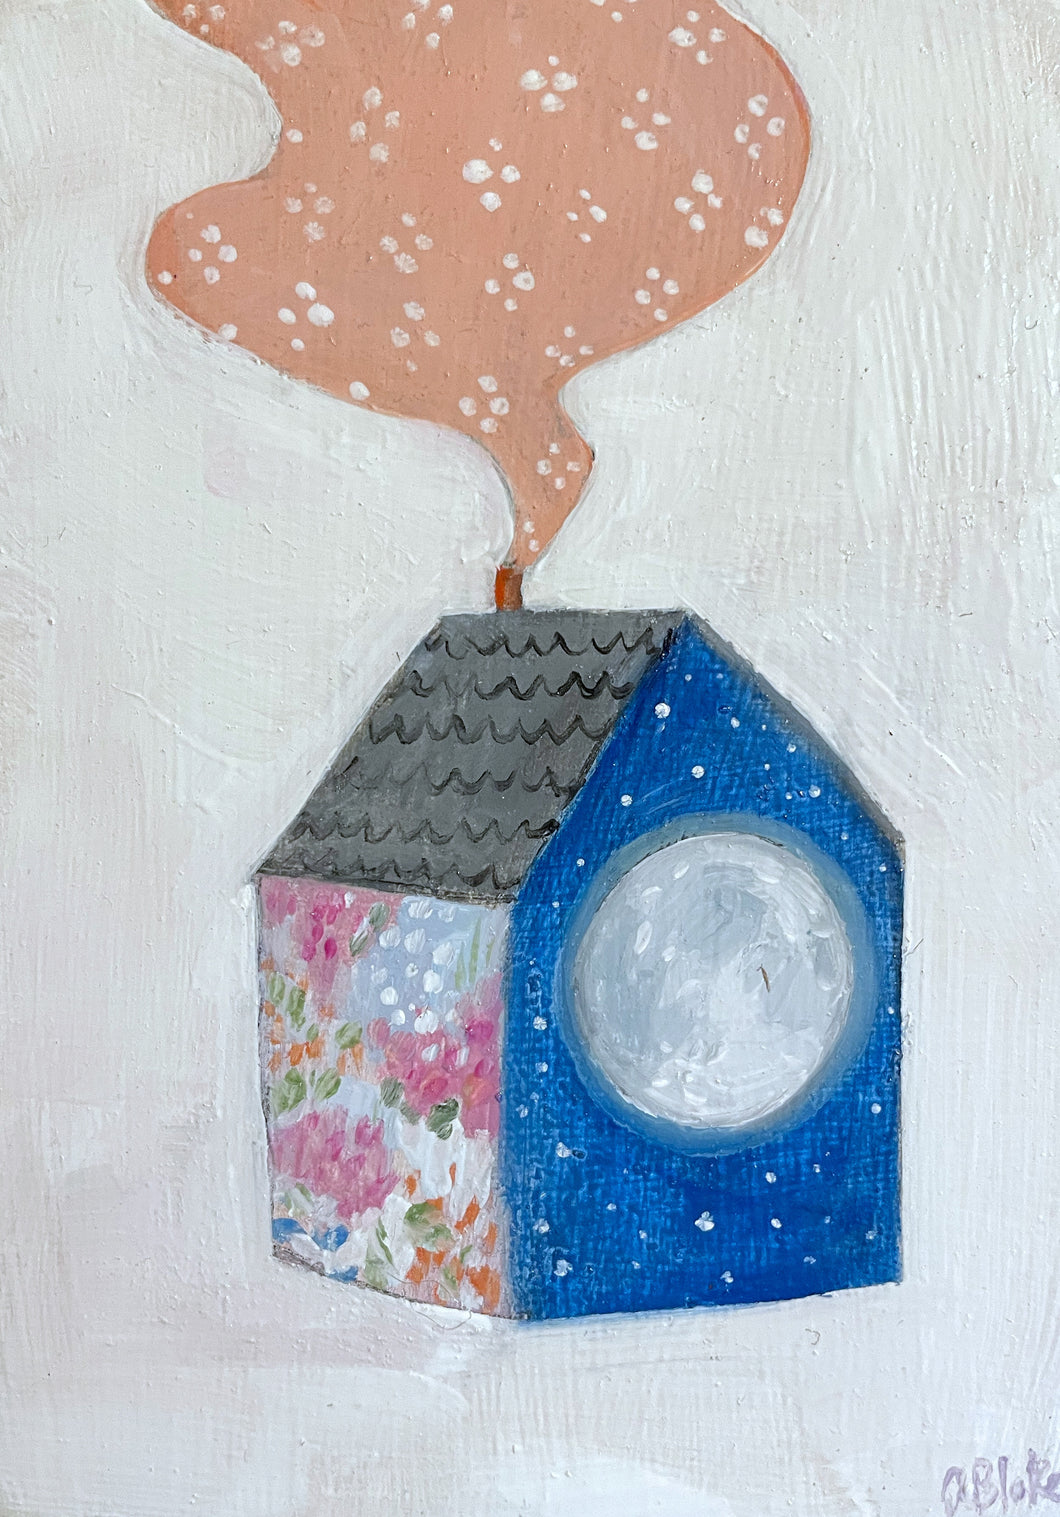 A home made of moonlight and wildflowers